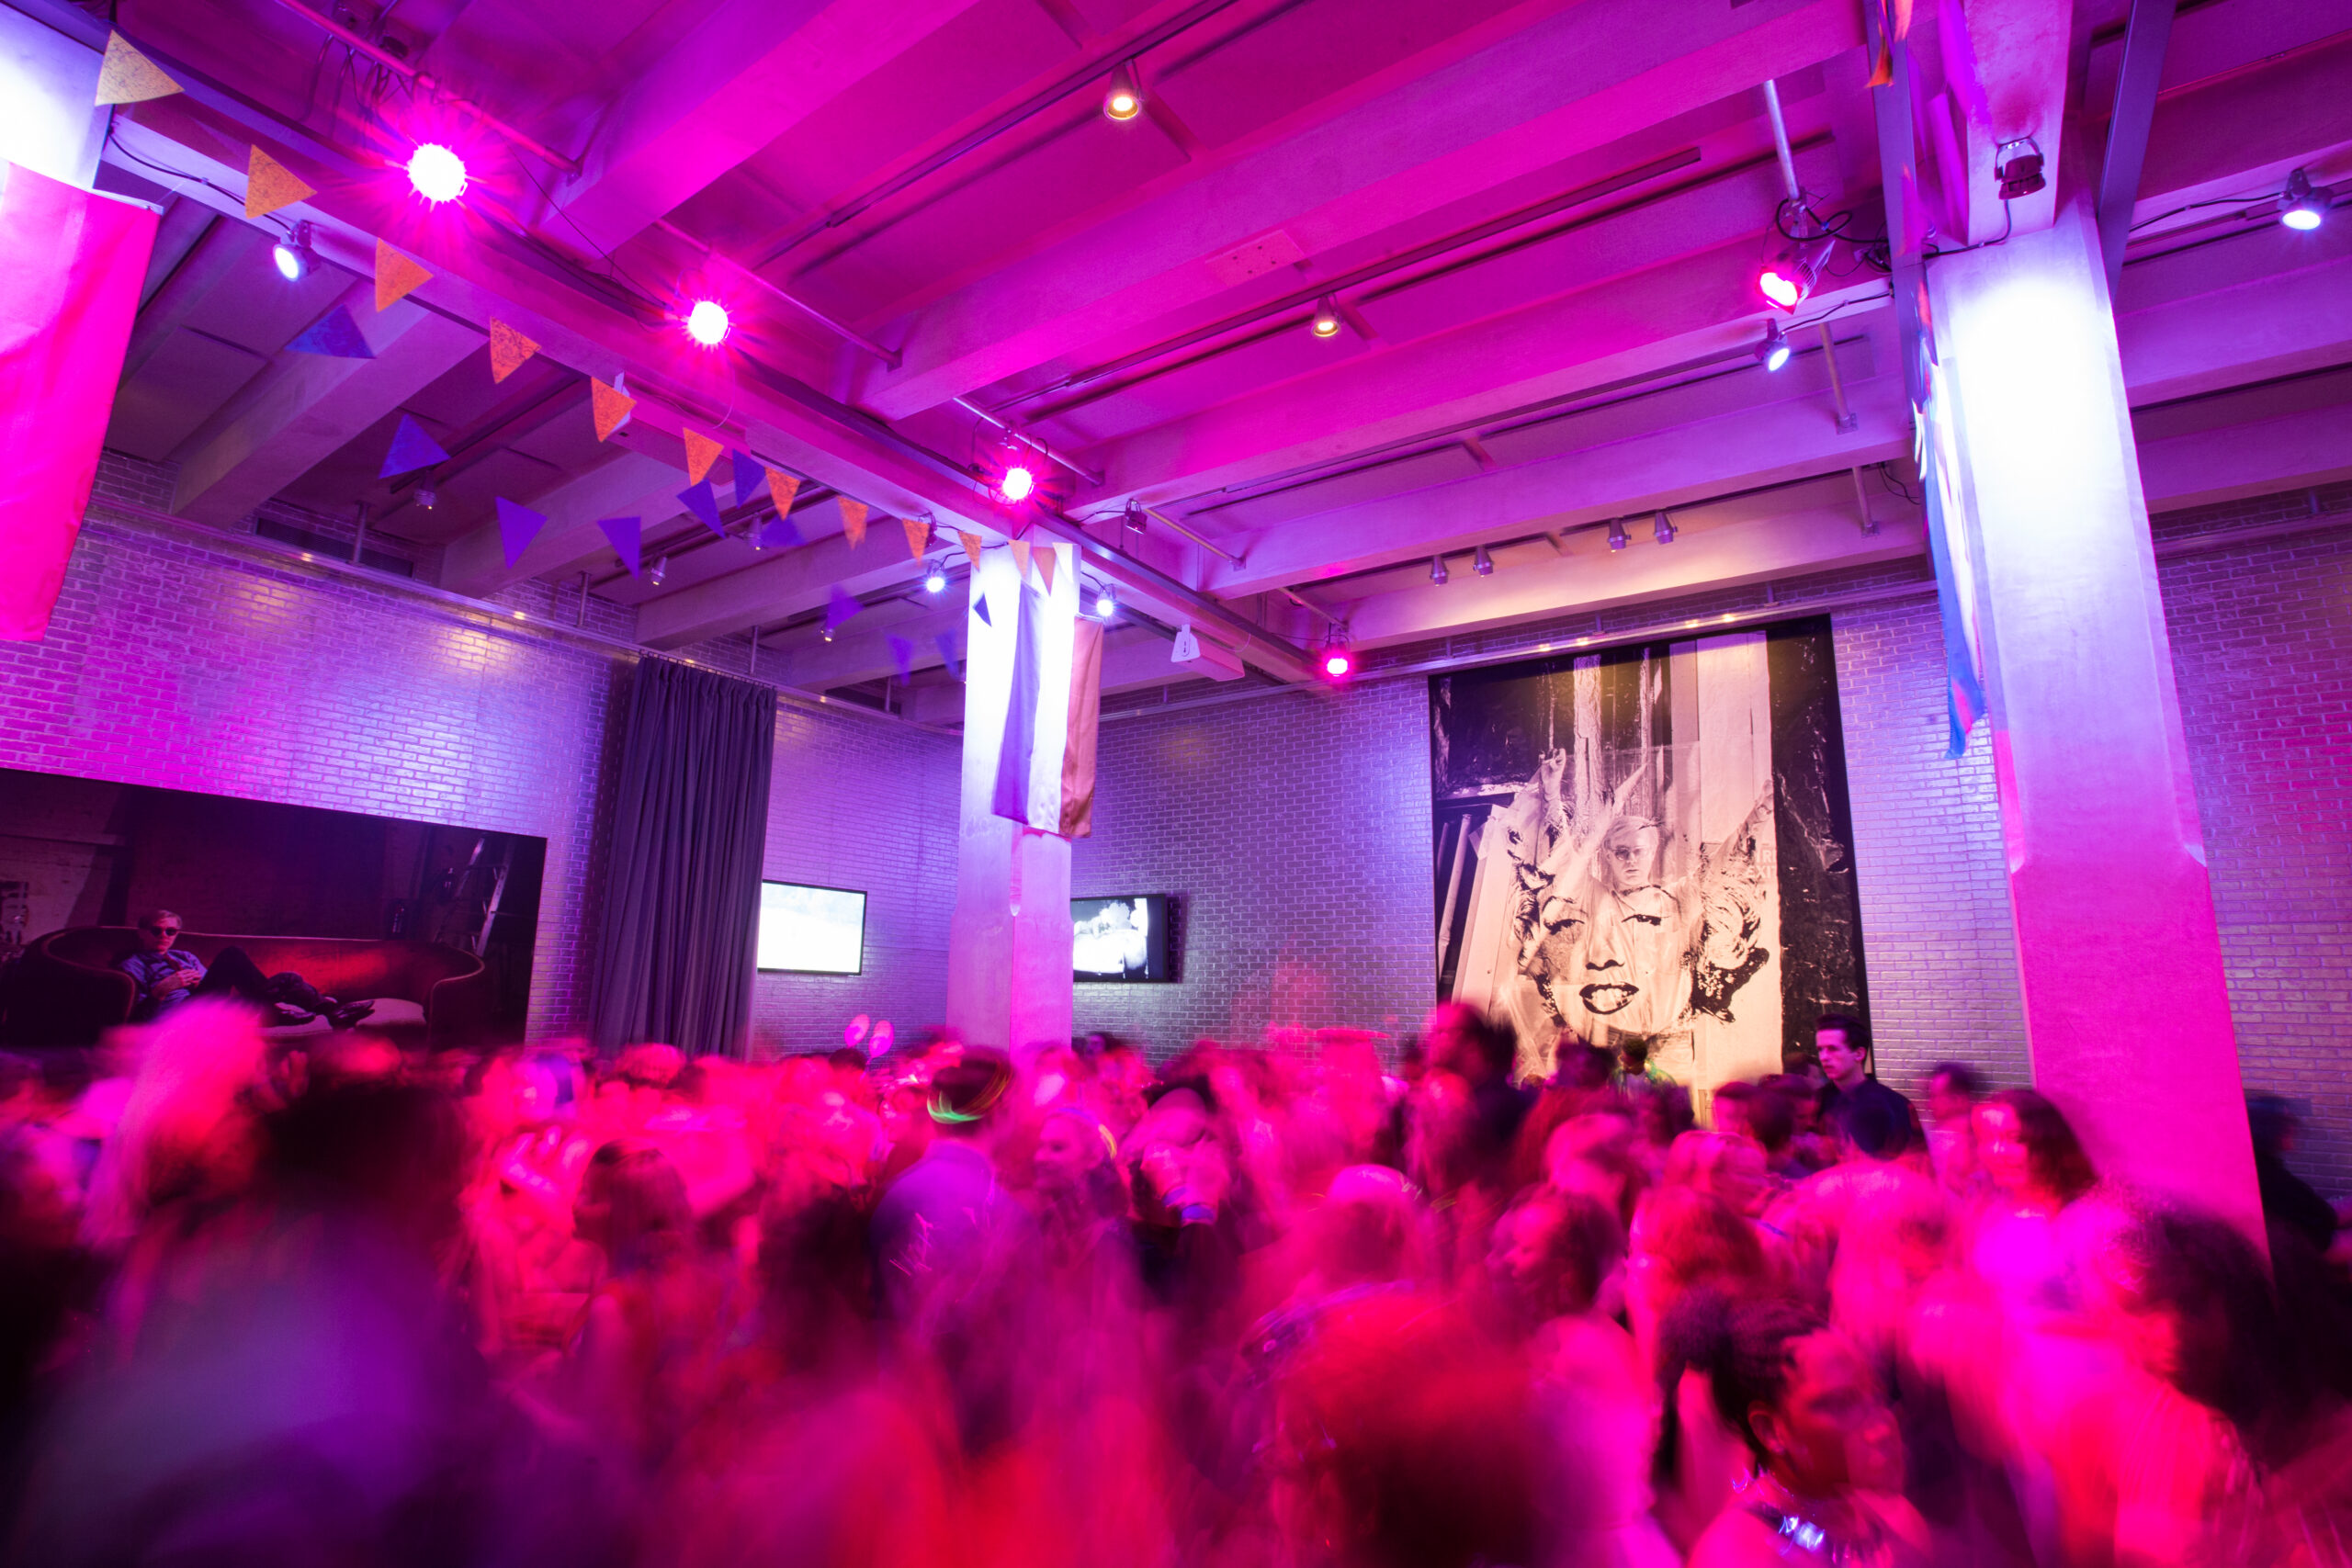 A large group of teenagers are in the lobby of The Andy Warhol Museum dancing. They are blurry due to their movement. There is pink lighting throughout the image. An image of Marilyn Monroe with Andy Warhol superimposed within it is in the background and to the left there is a photograph of Andy Warhol laying on a red couch on the wall. There are also two small video screens in the background hanging on the wall.